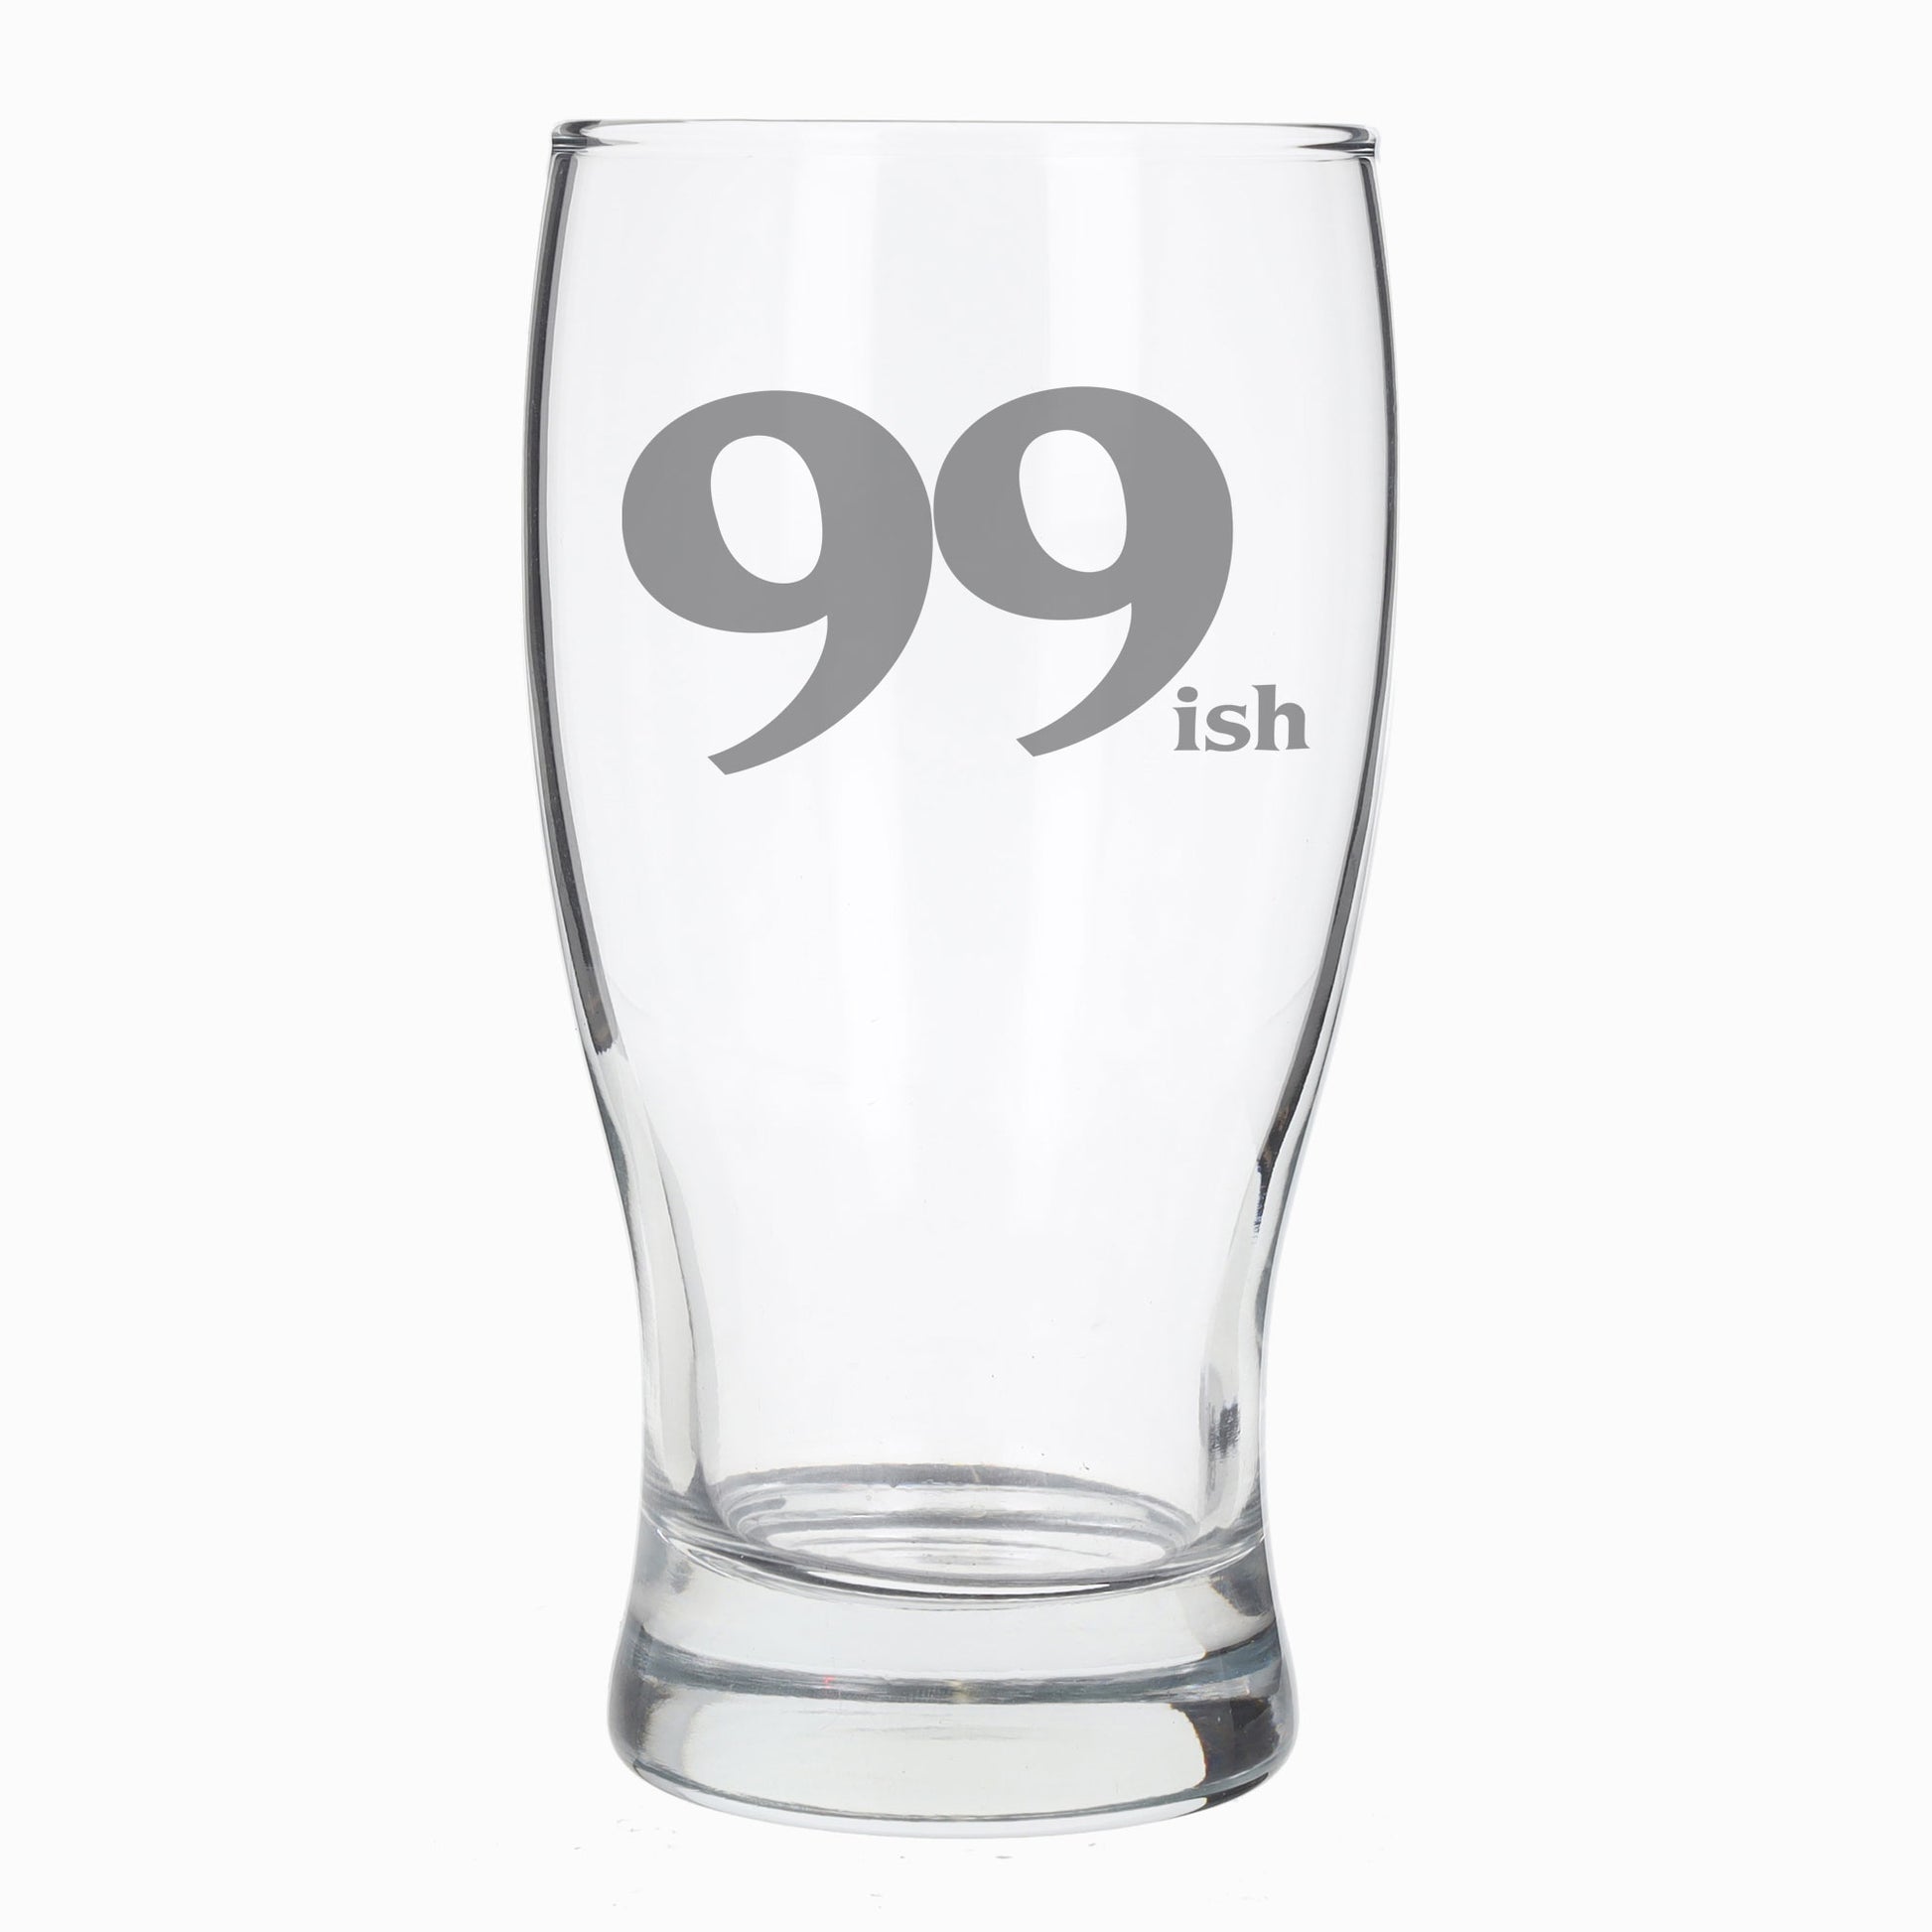 99ish Pint Glass and/or Coaster Set  - Always Looking Good - Pint Glass On Its Own  